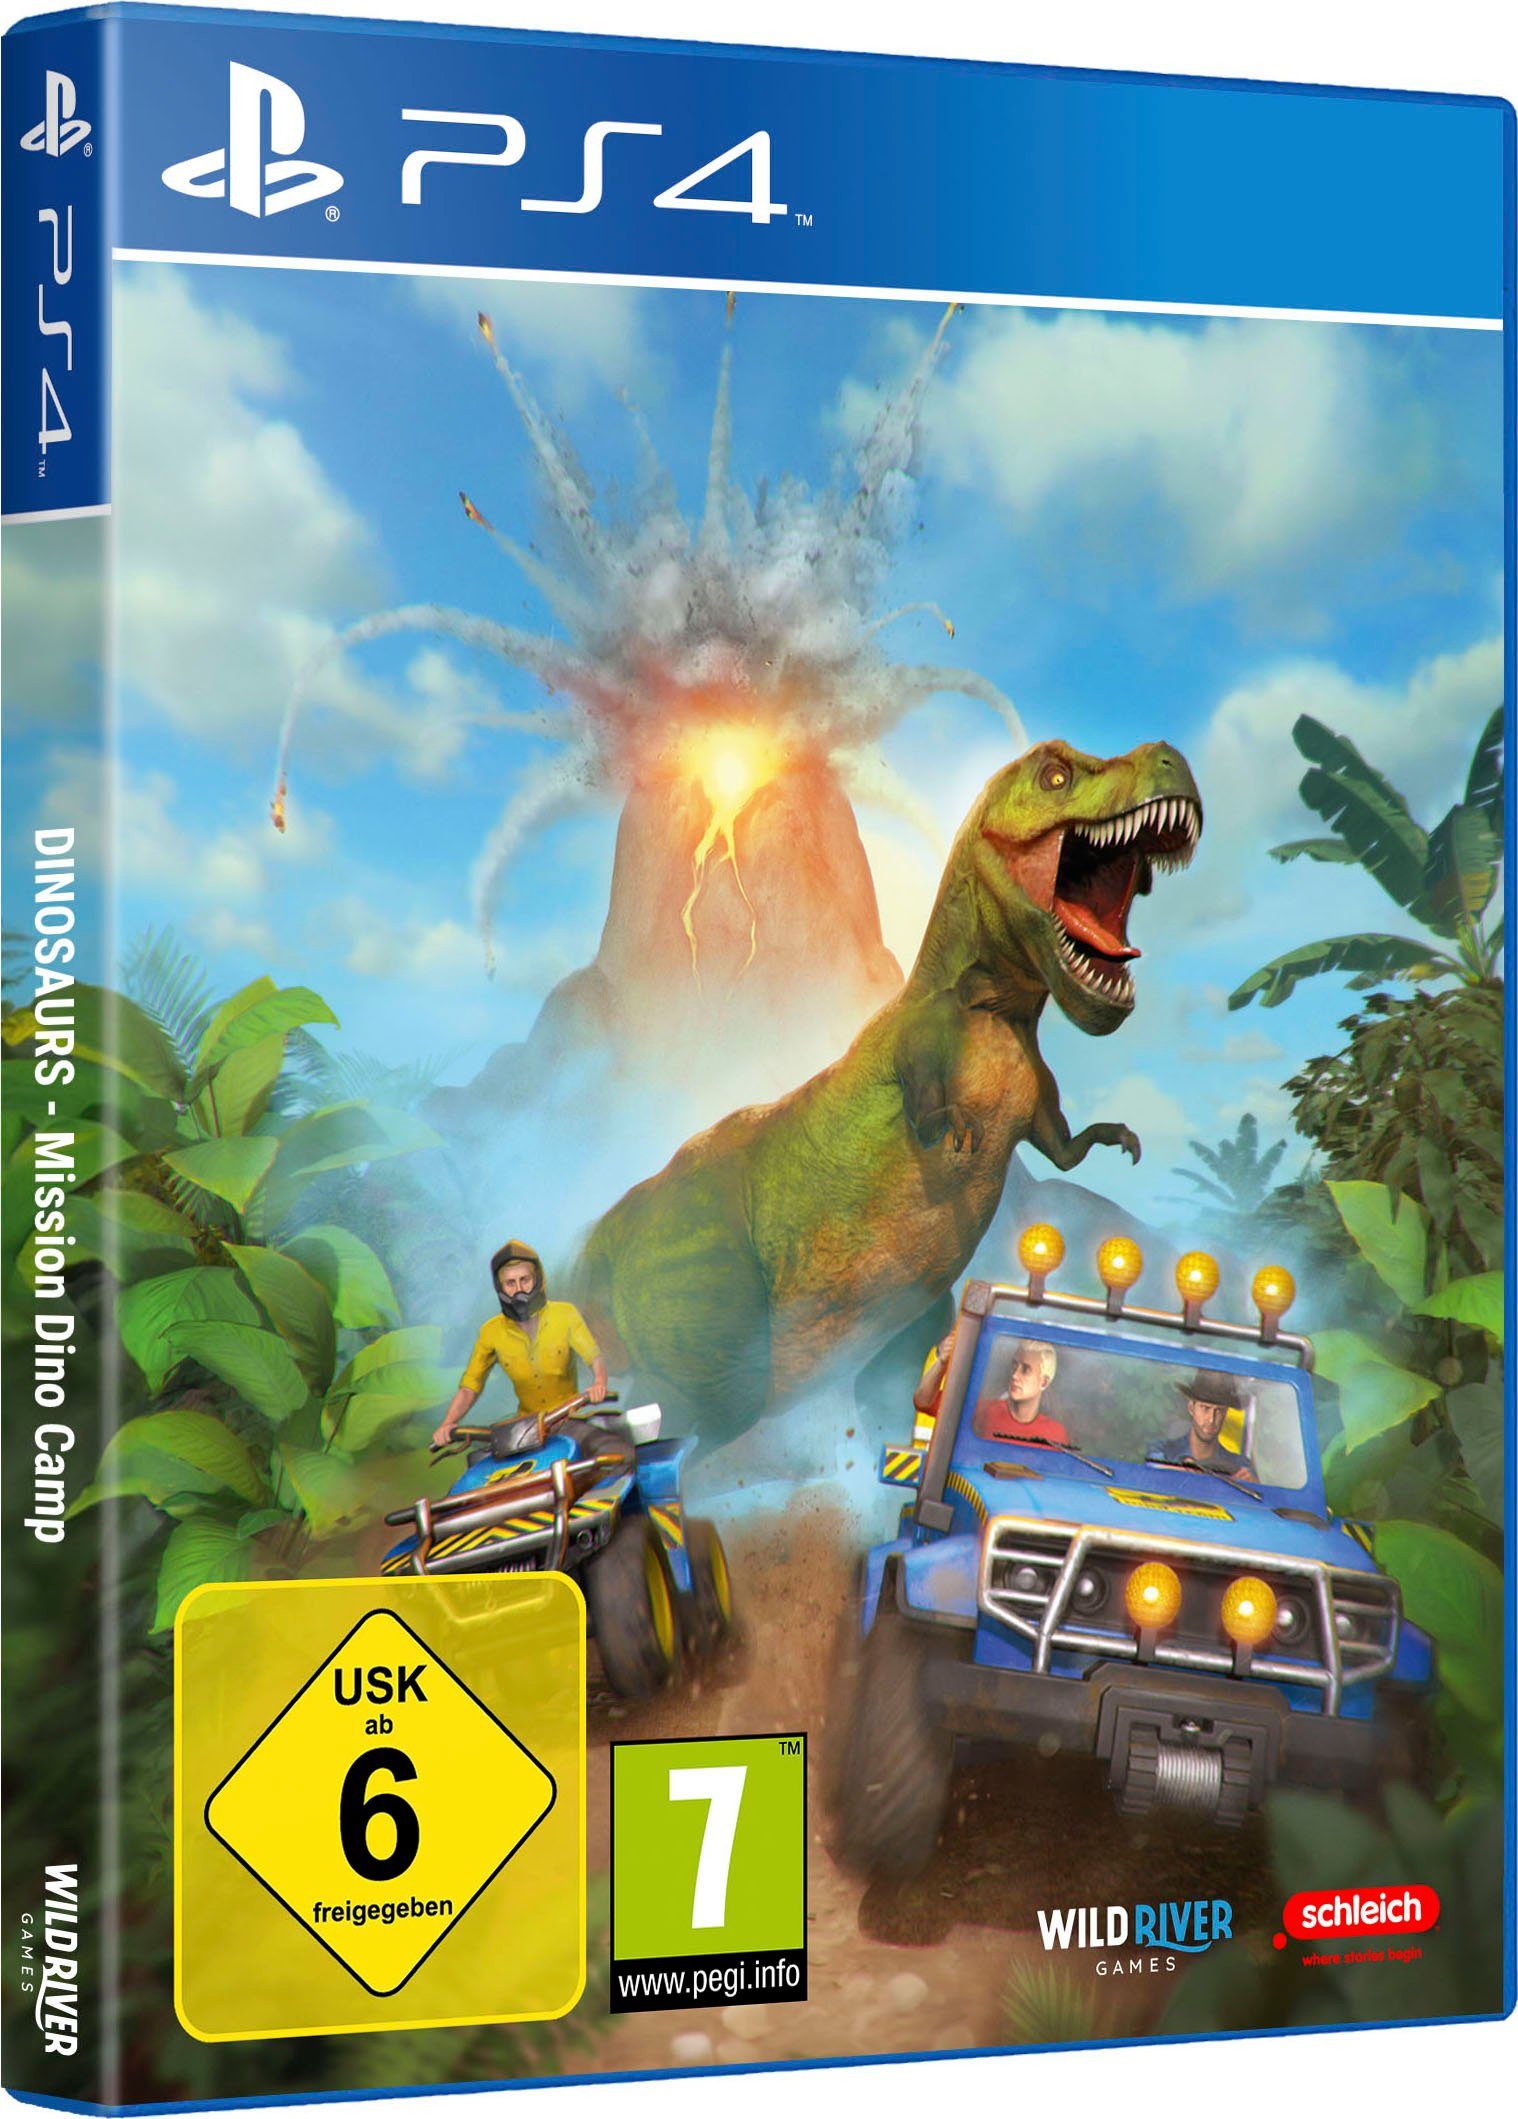 Camp Pyramide Dinosaurs: 4 Mission Dino Software PlayStation